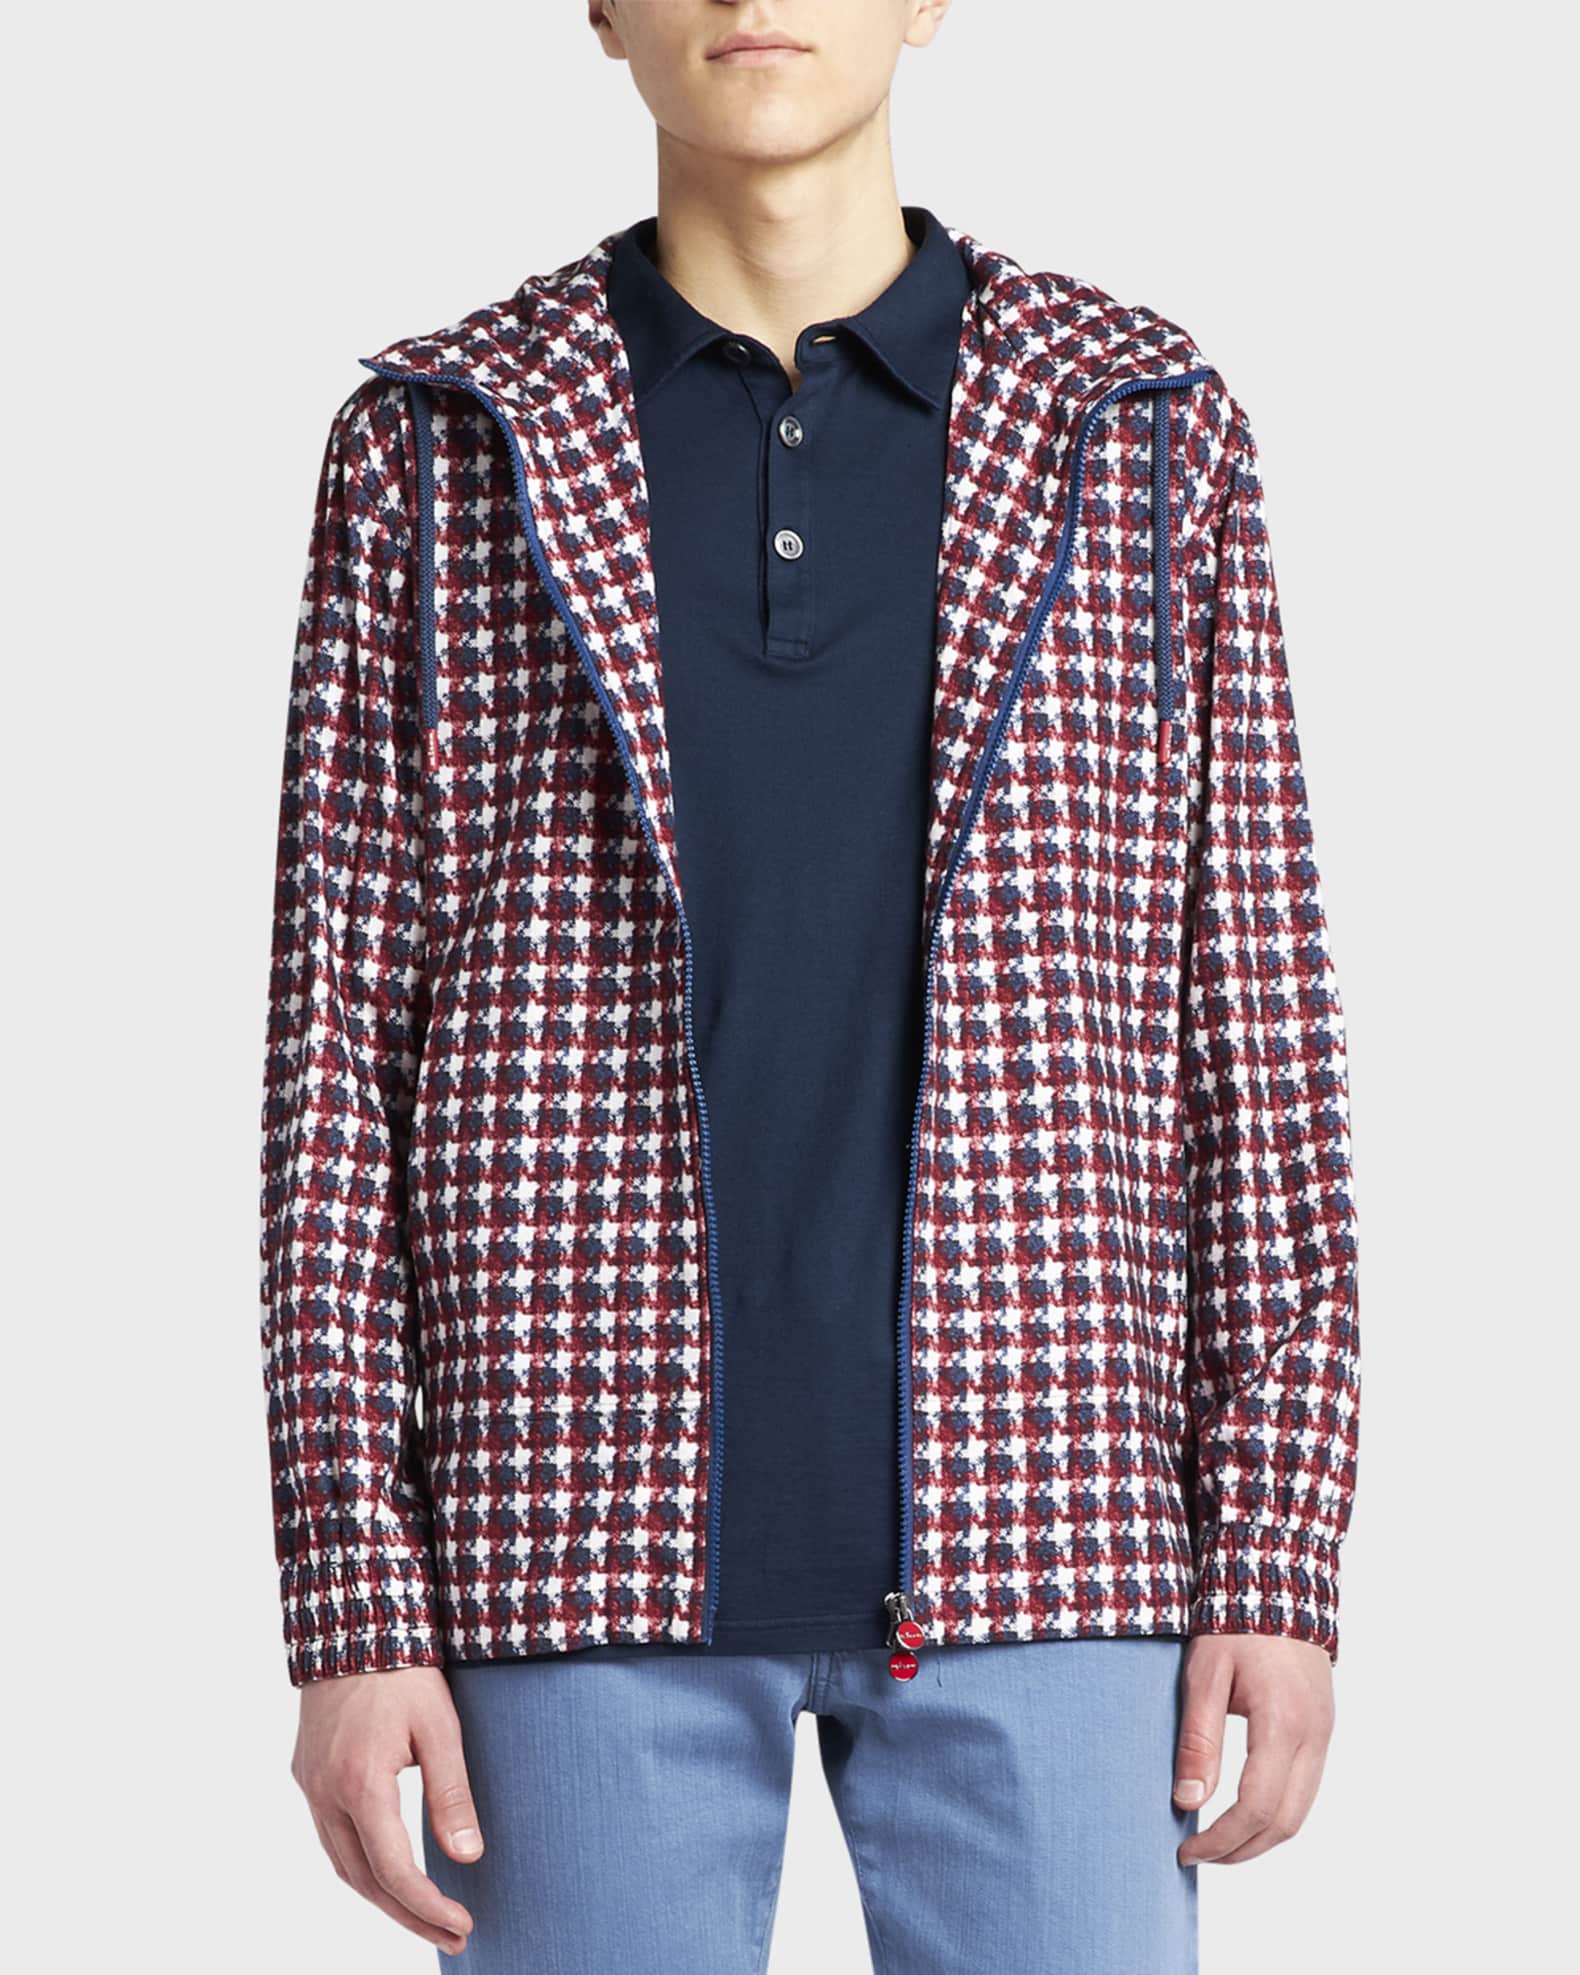 Gucci Red & Navy Geometric Houndstooth Jacket for Men